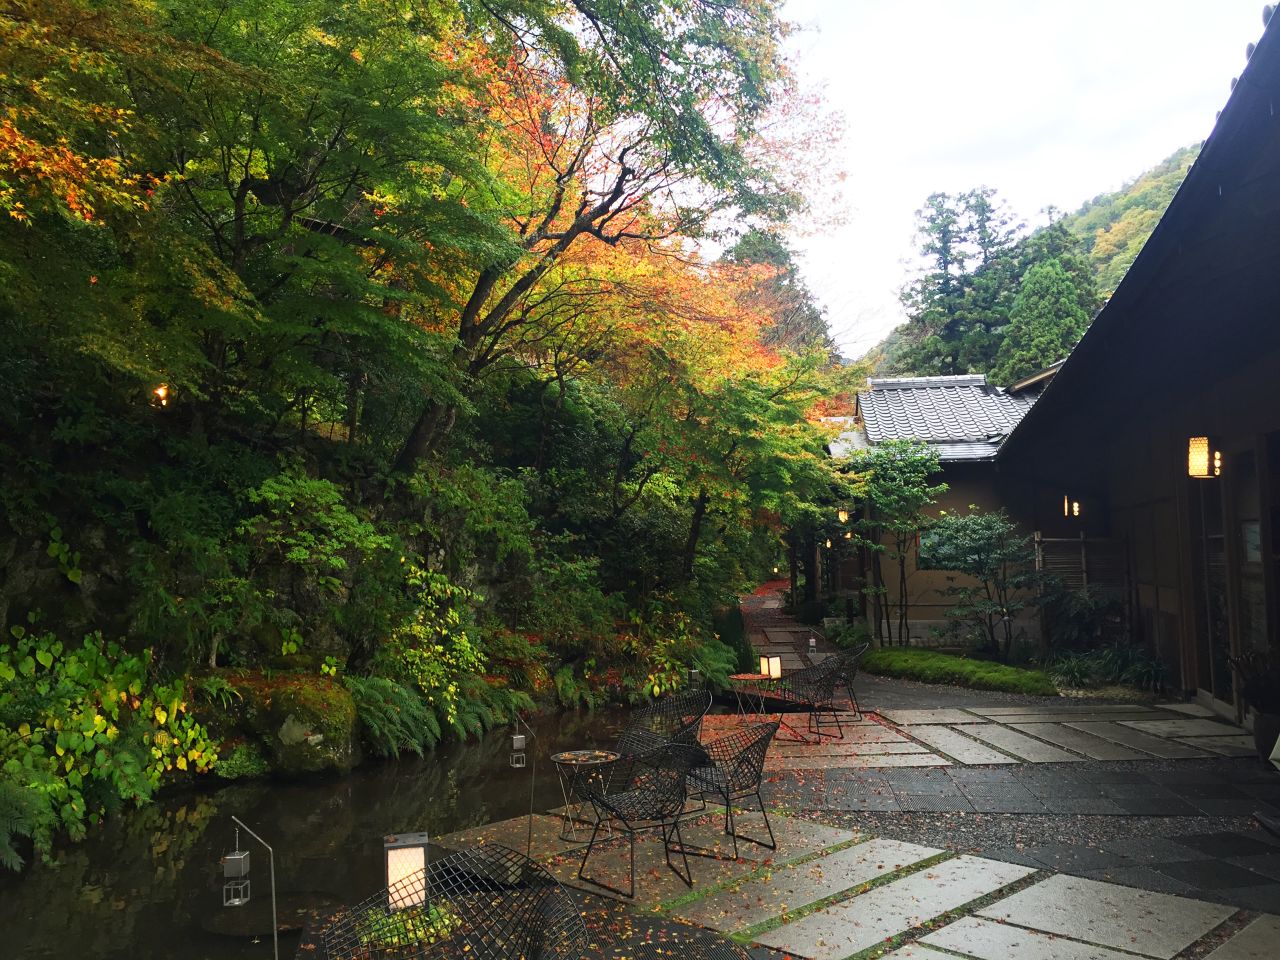 The ryokan has been owned by the Hoshinoya group for the past six years and has undergone several significant upgrades since then. 